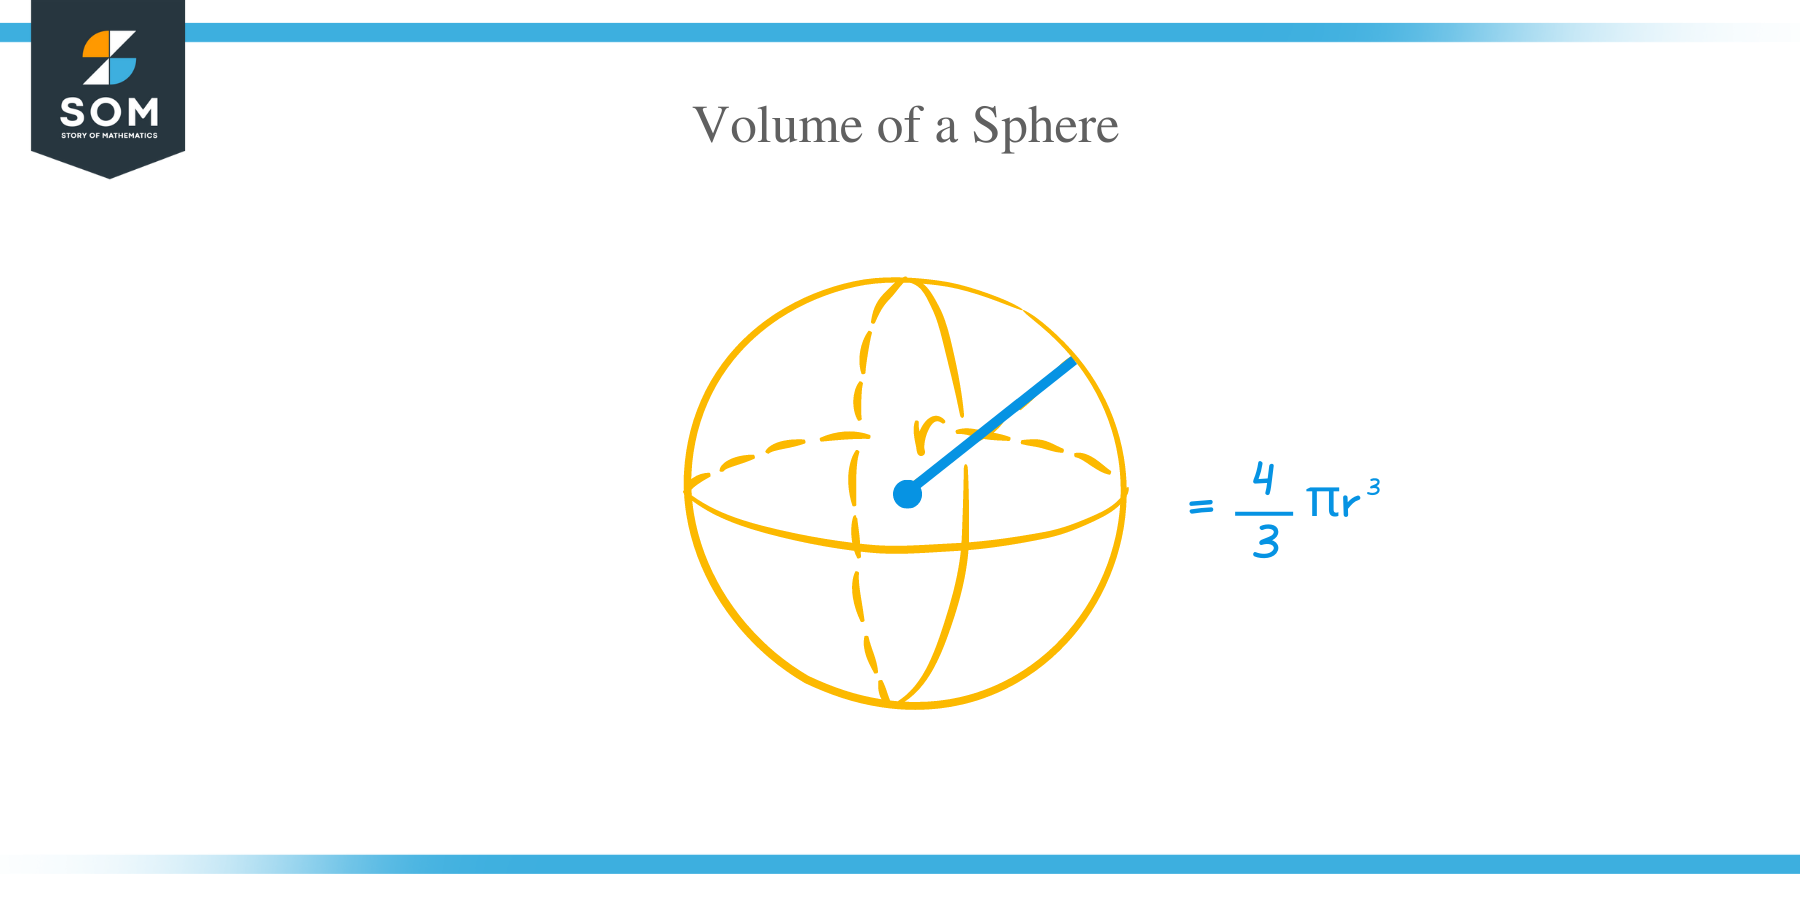 How to Find the Volume of a Sphere?